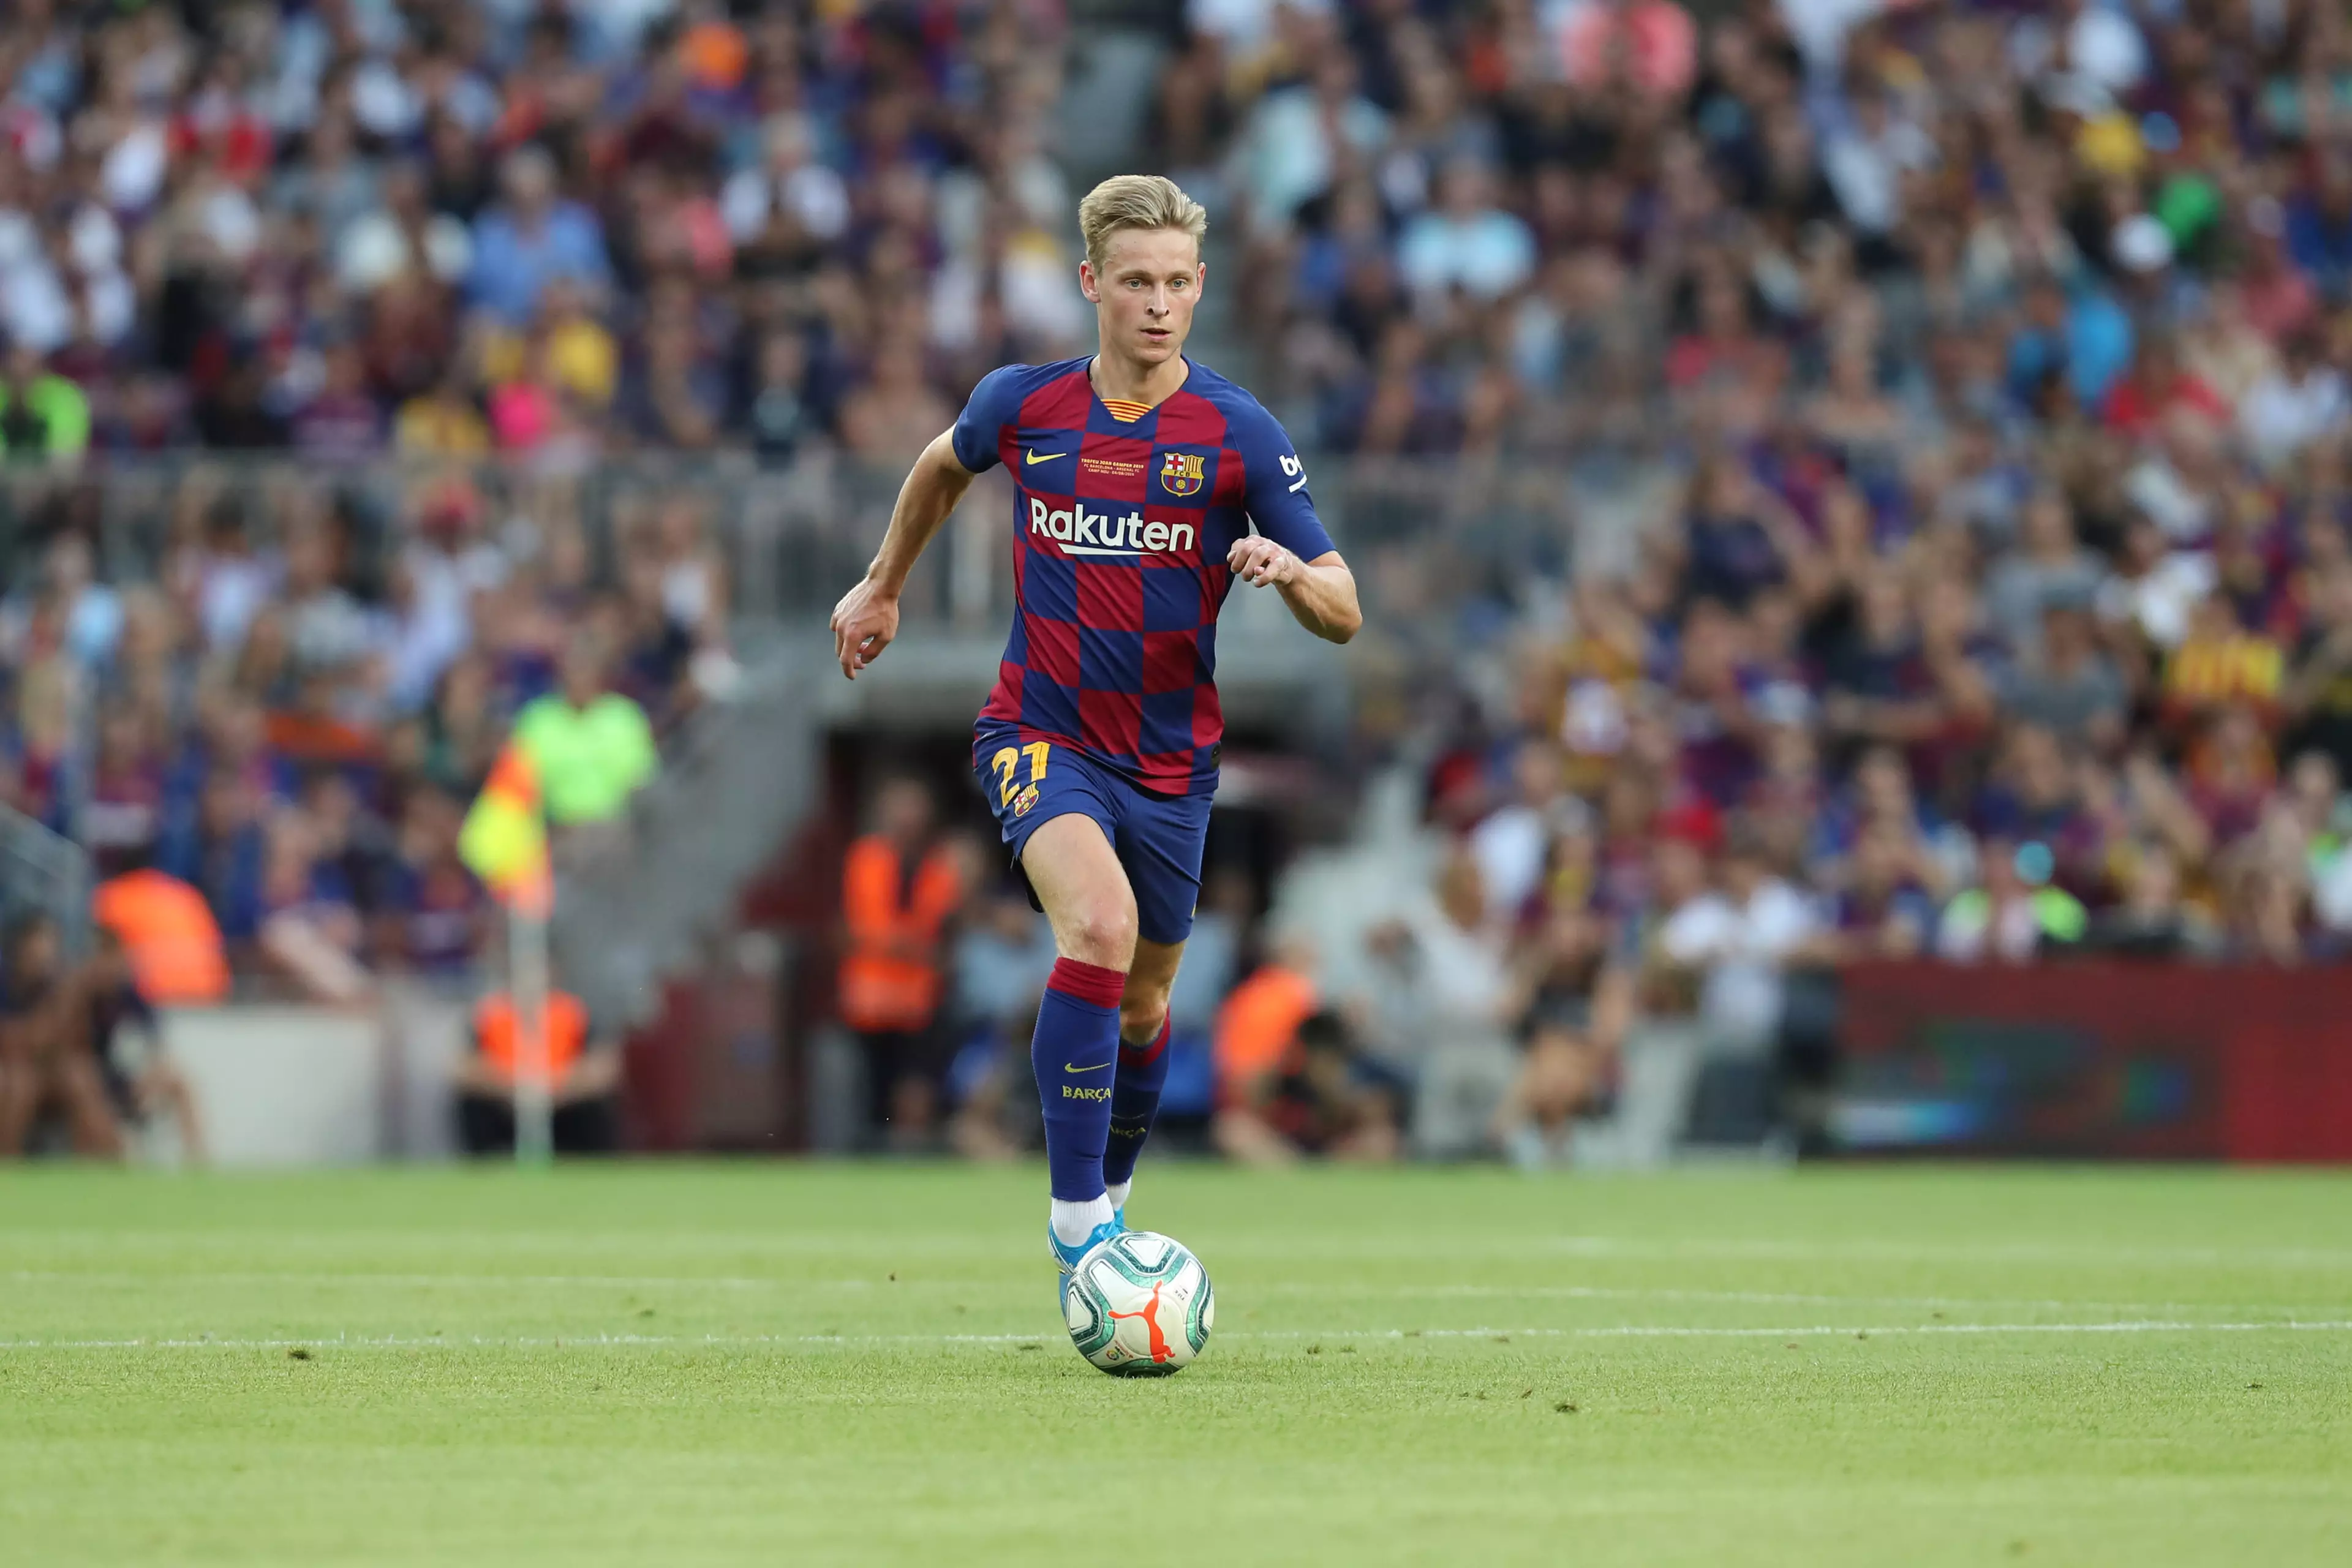 De Jong could be a huge star for Barca. Image: PA Images